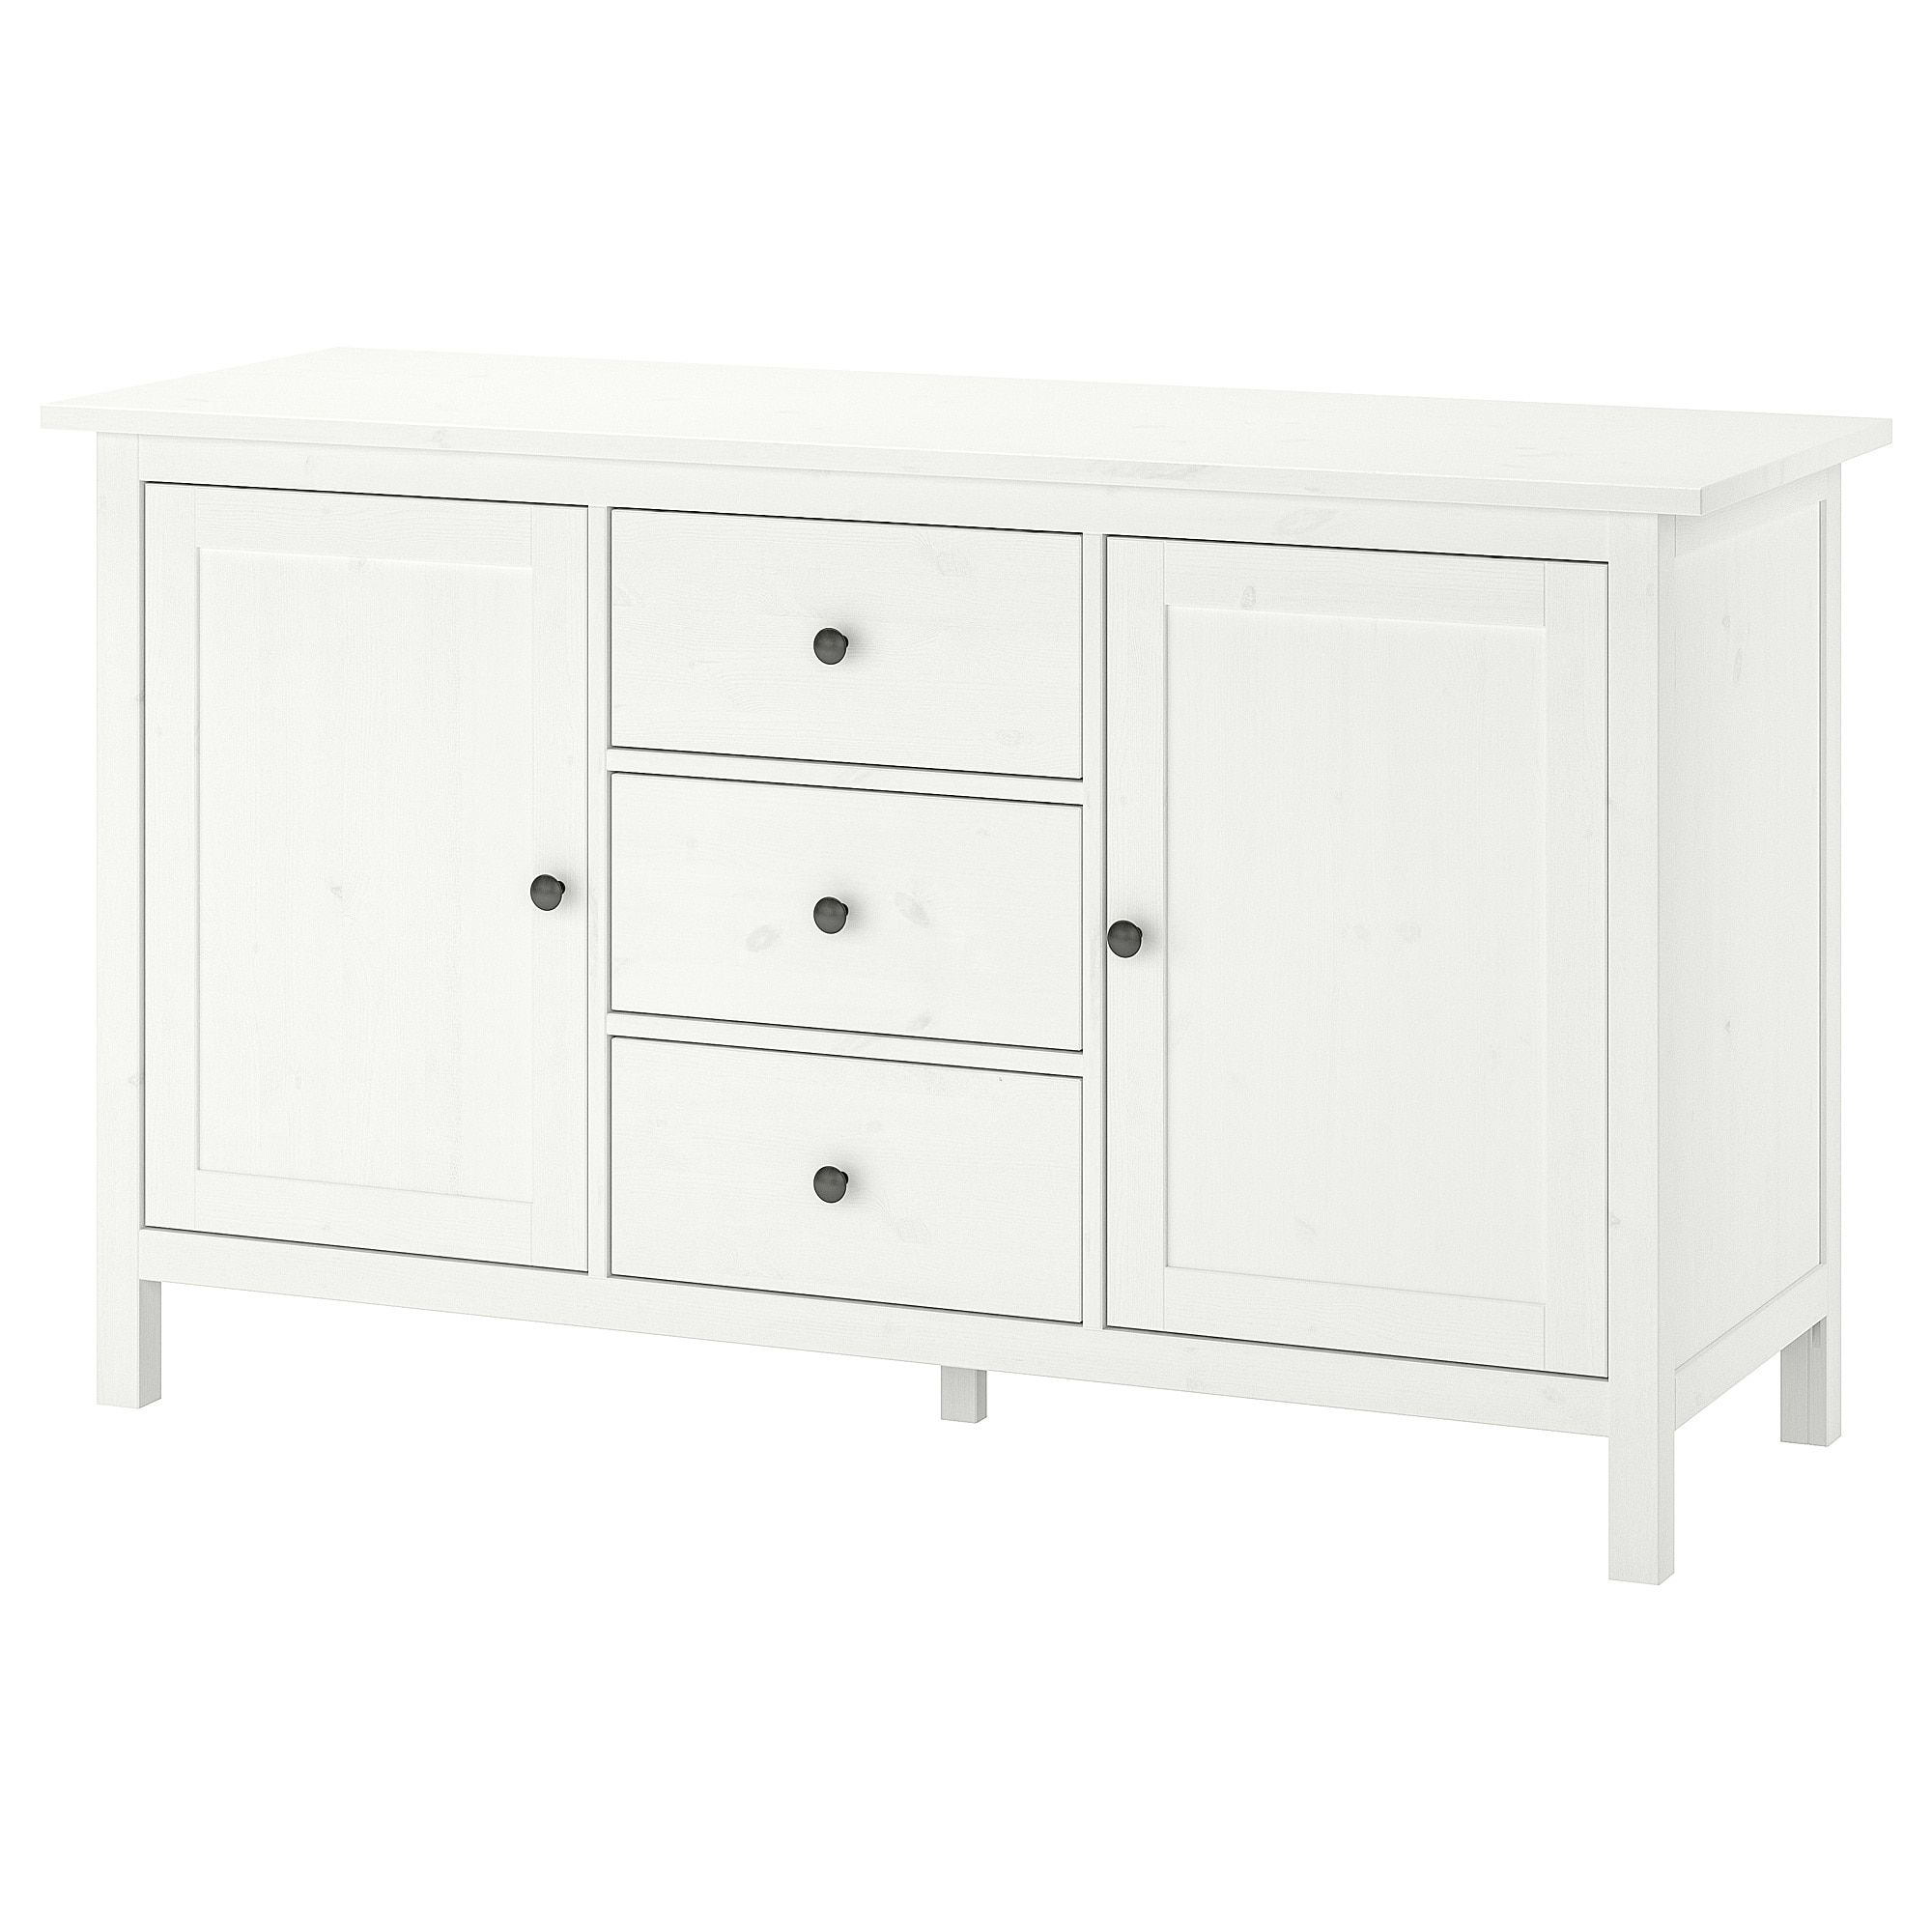 Sideboard Hemnes White Stain With Recent Thite Sideboards (View 8 of 20)